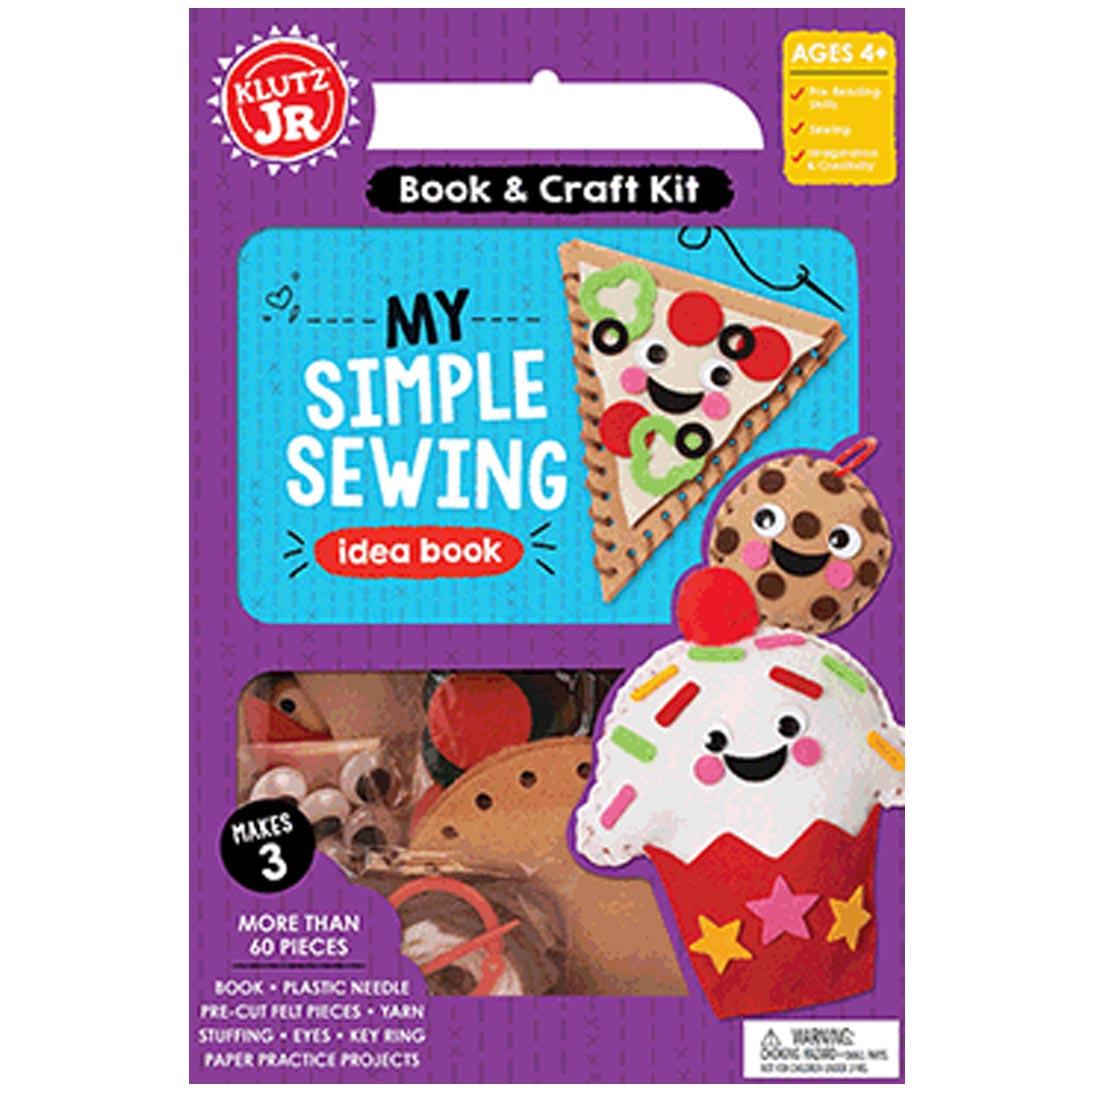 my simple sewing kit shows completed projects of a slice of pizza, cookie and cupcake